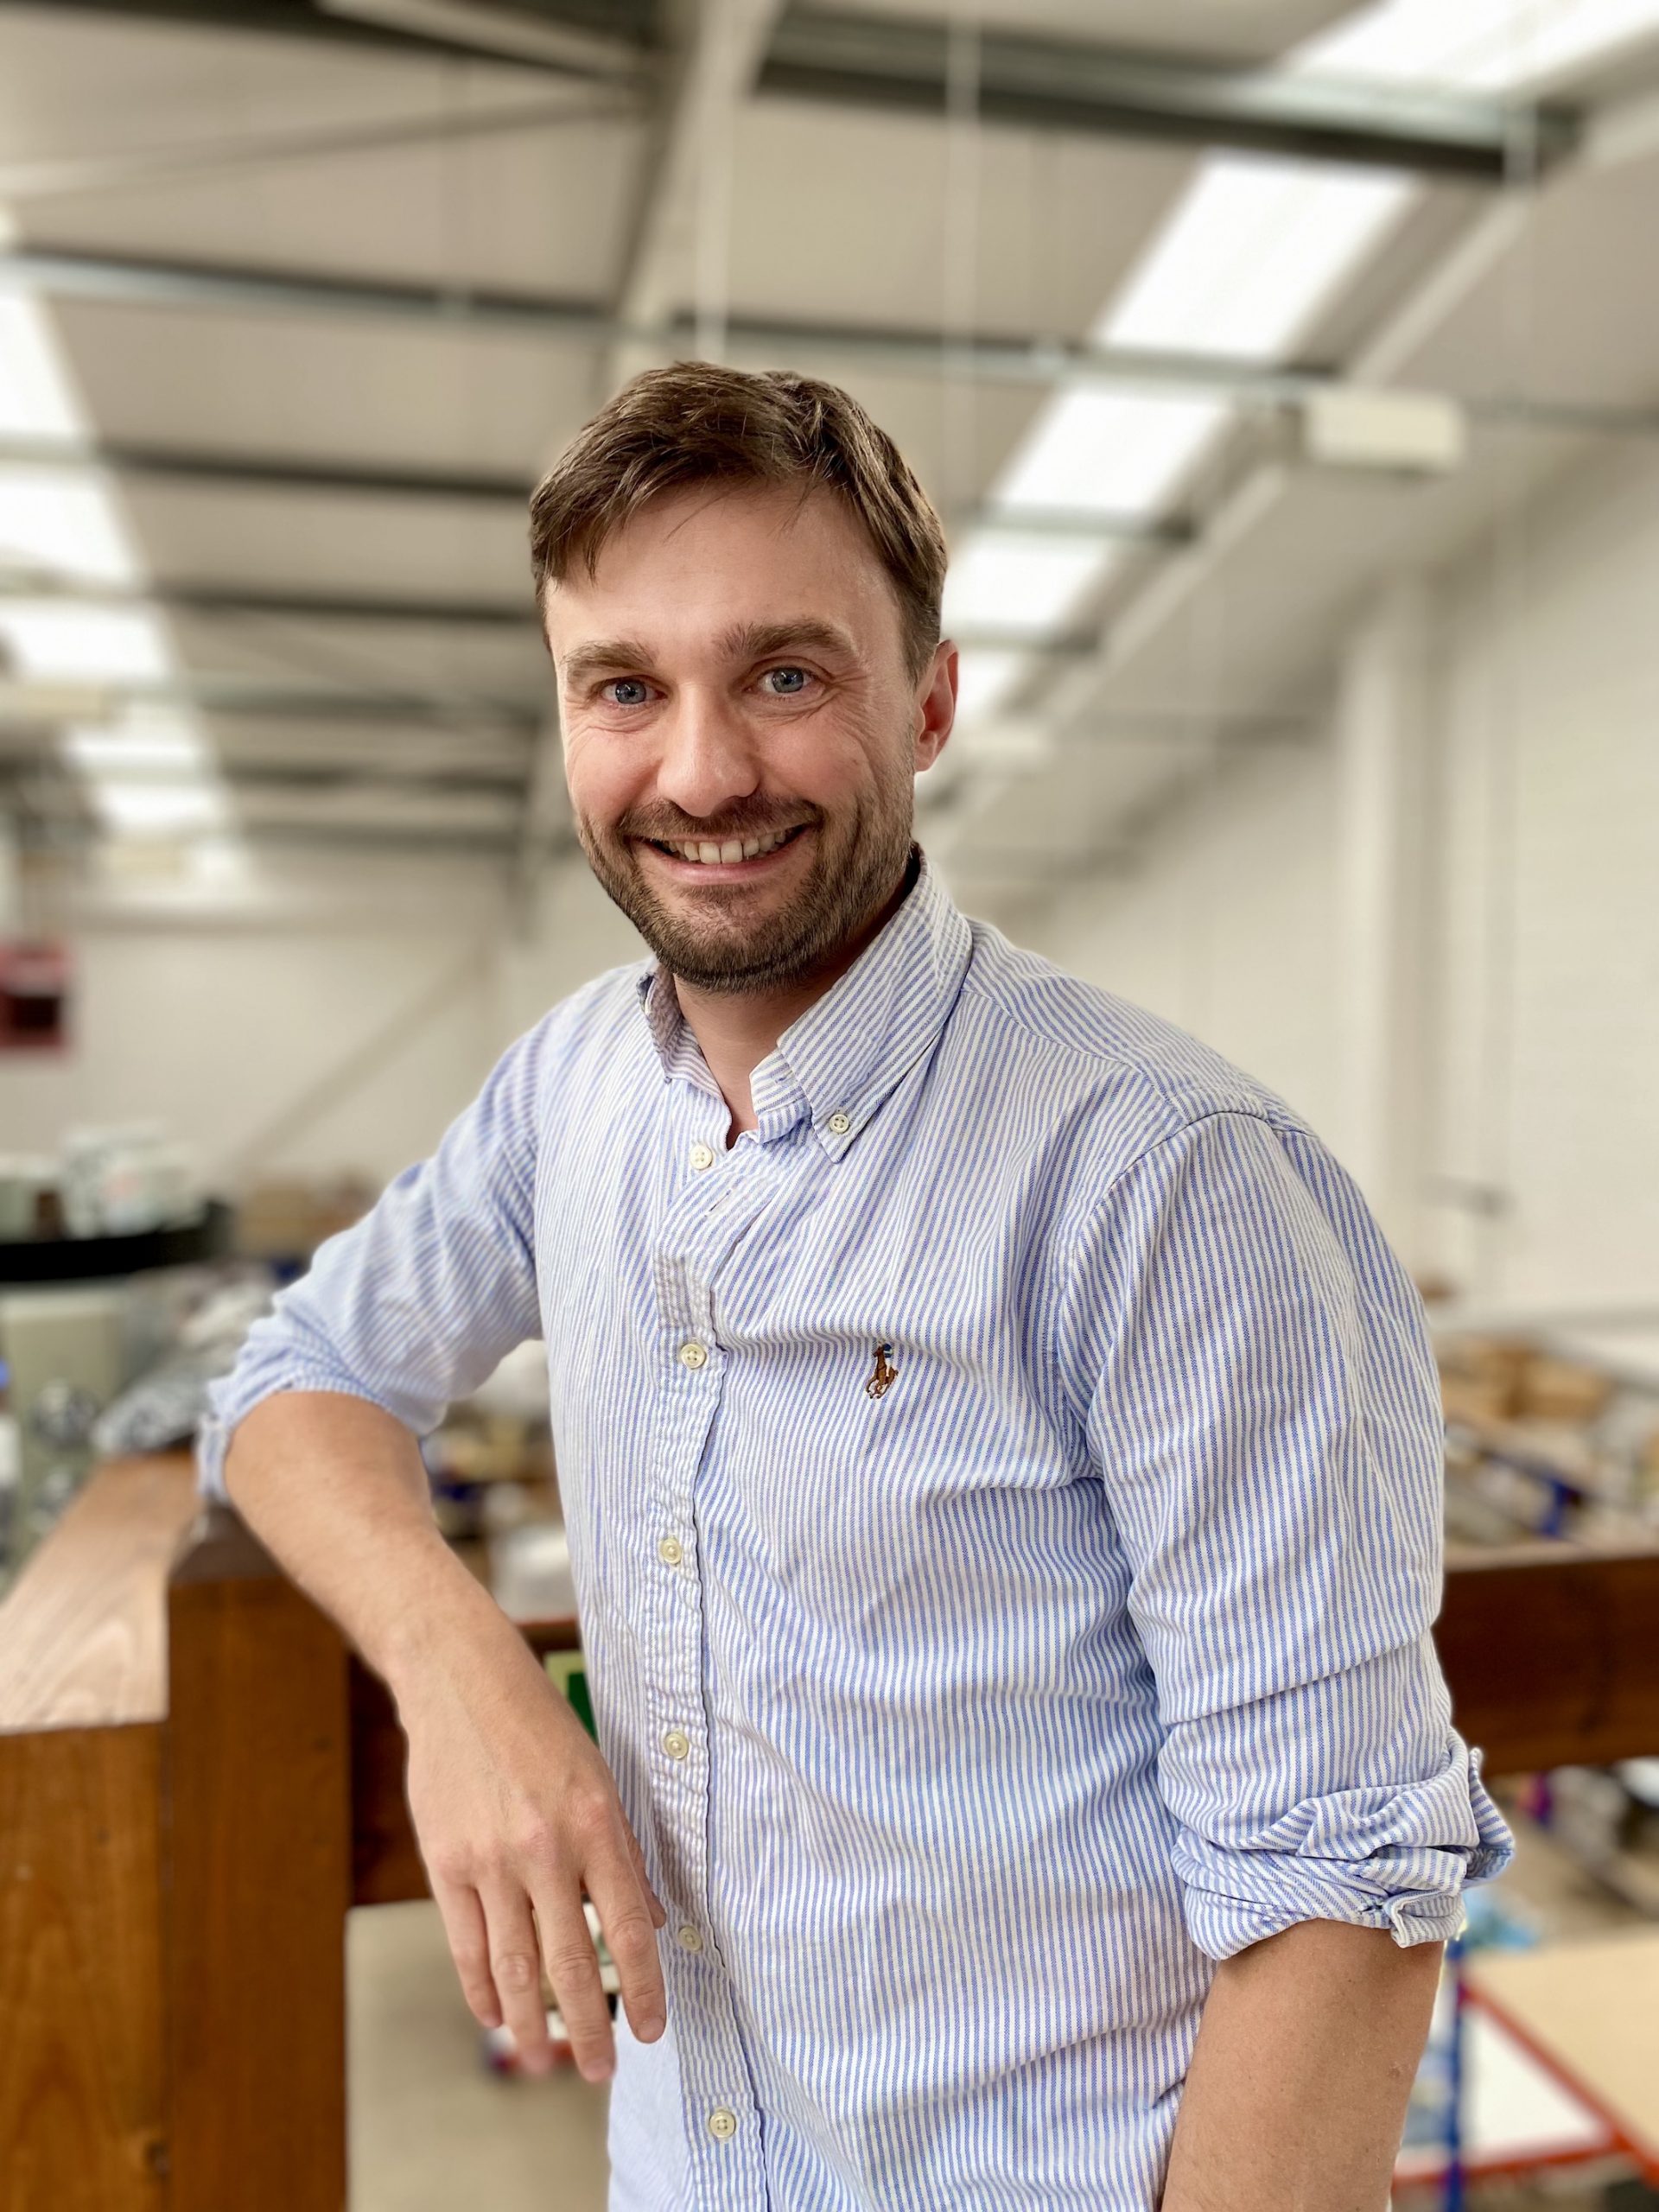 Ben Bristow is a director of Paul Bristow's a family run textile manufacture in the UK